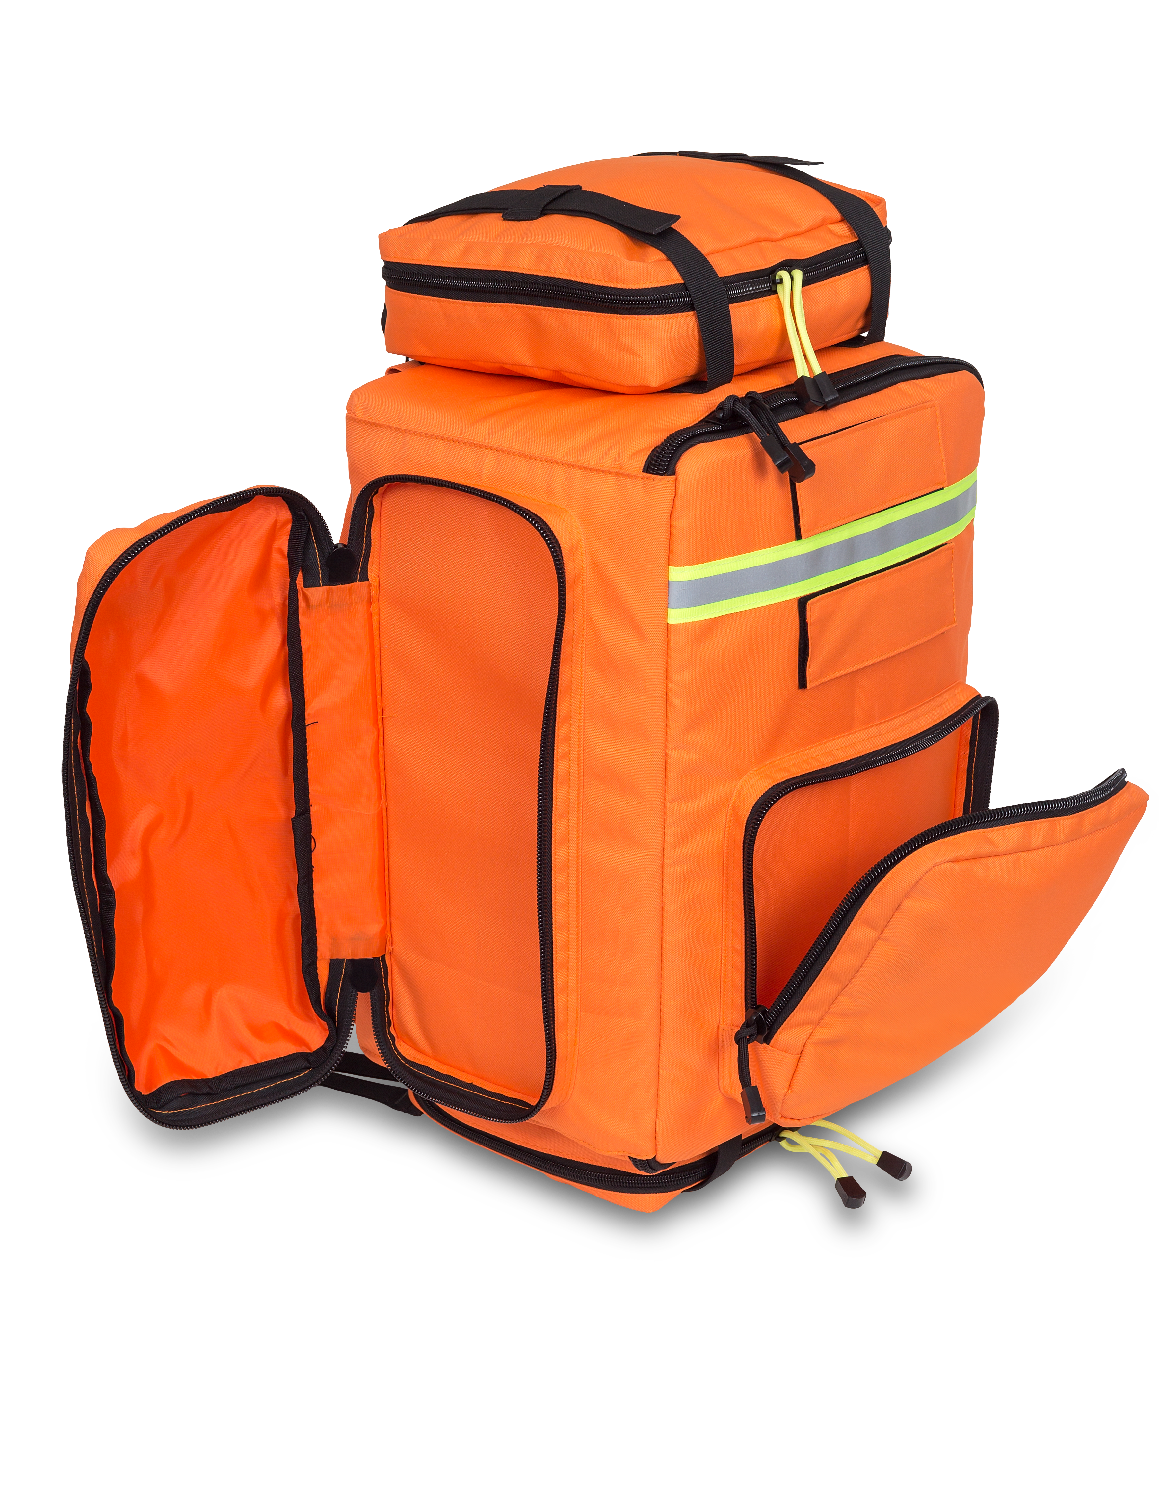 Disaster Supply Backpack